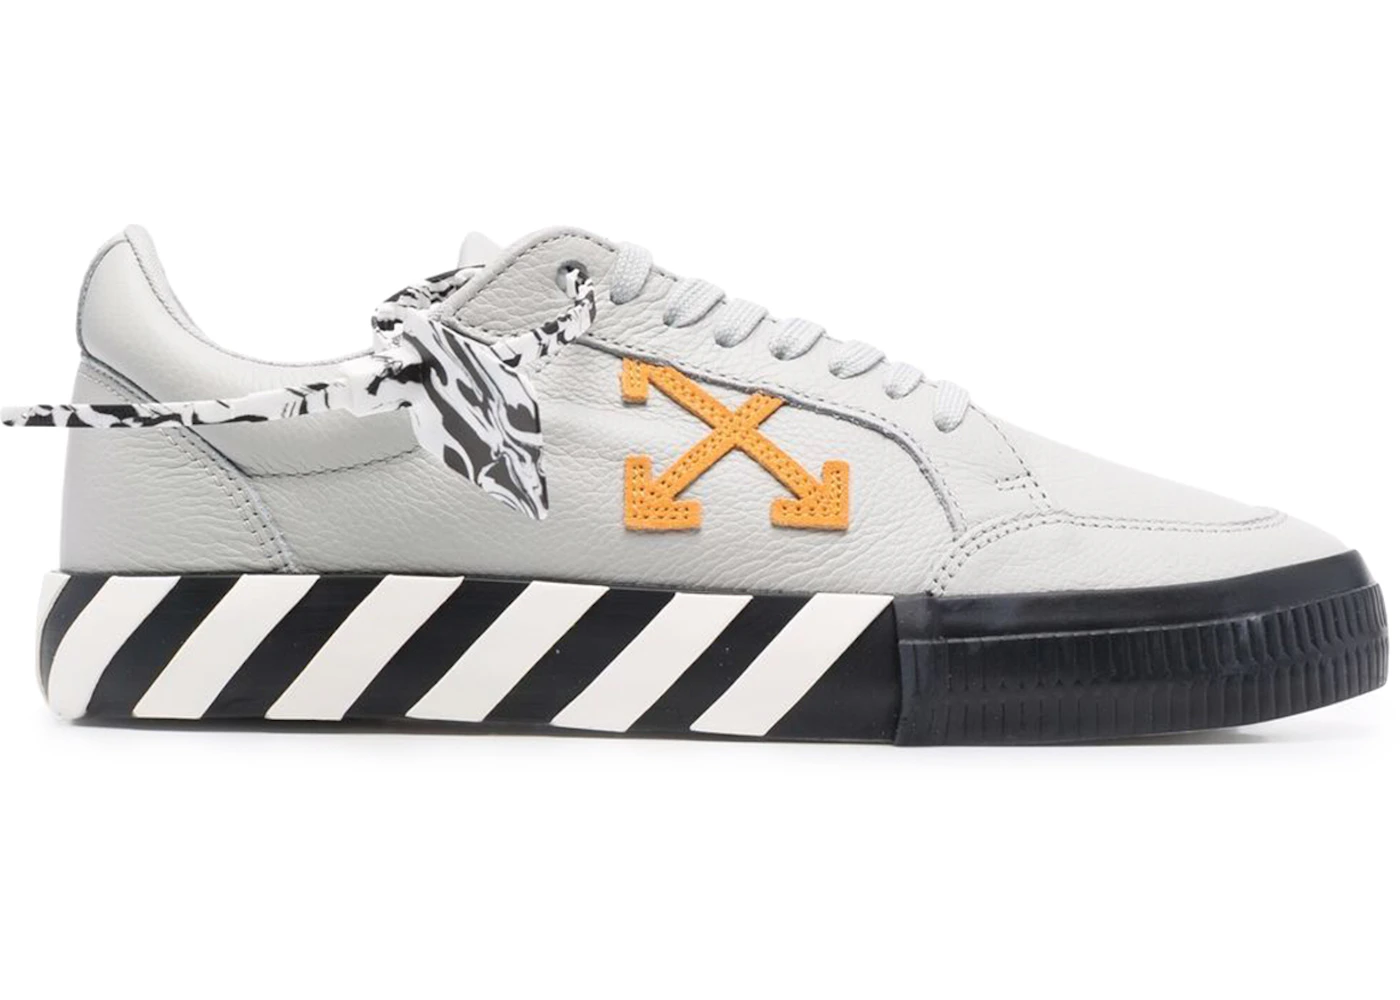 OFF-WHITE Vulc Low Leather Light Grey Yellow Men's ...